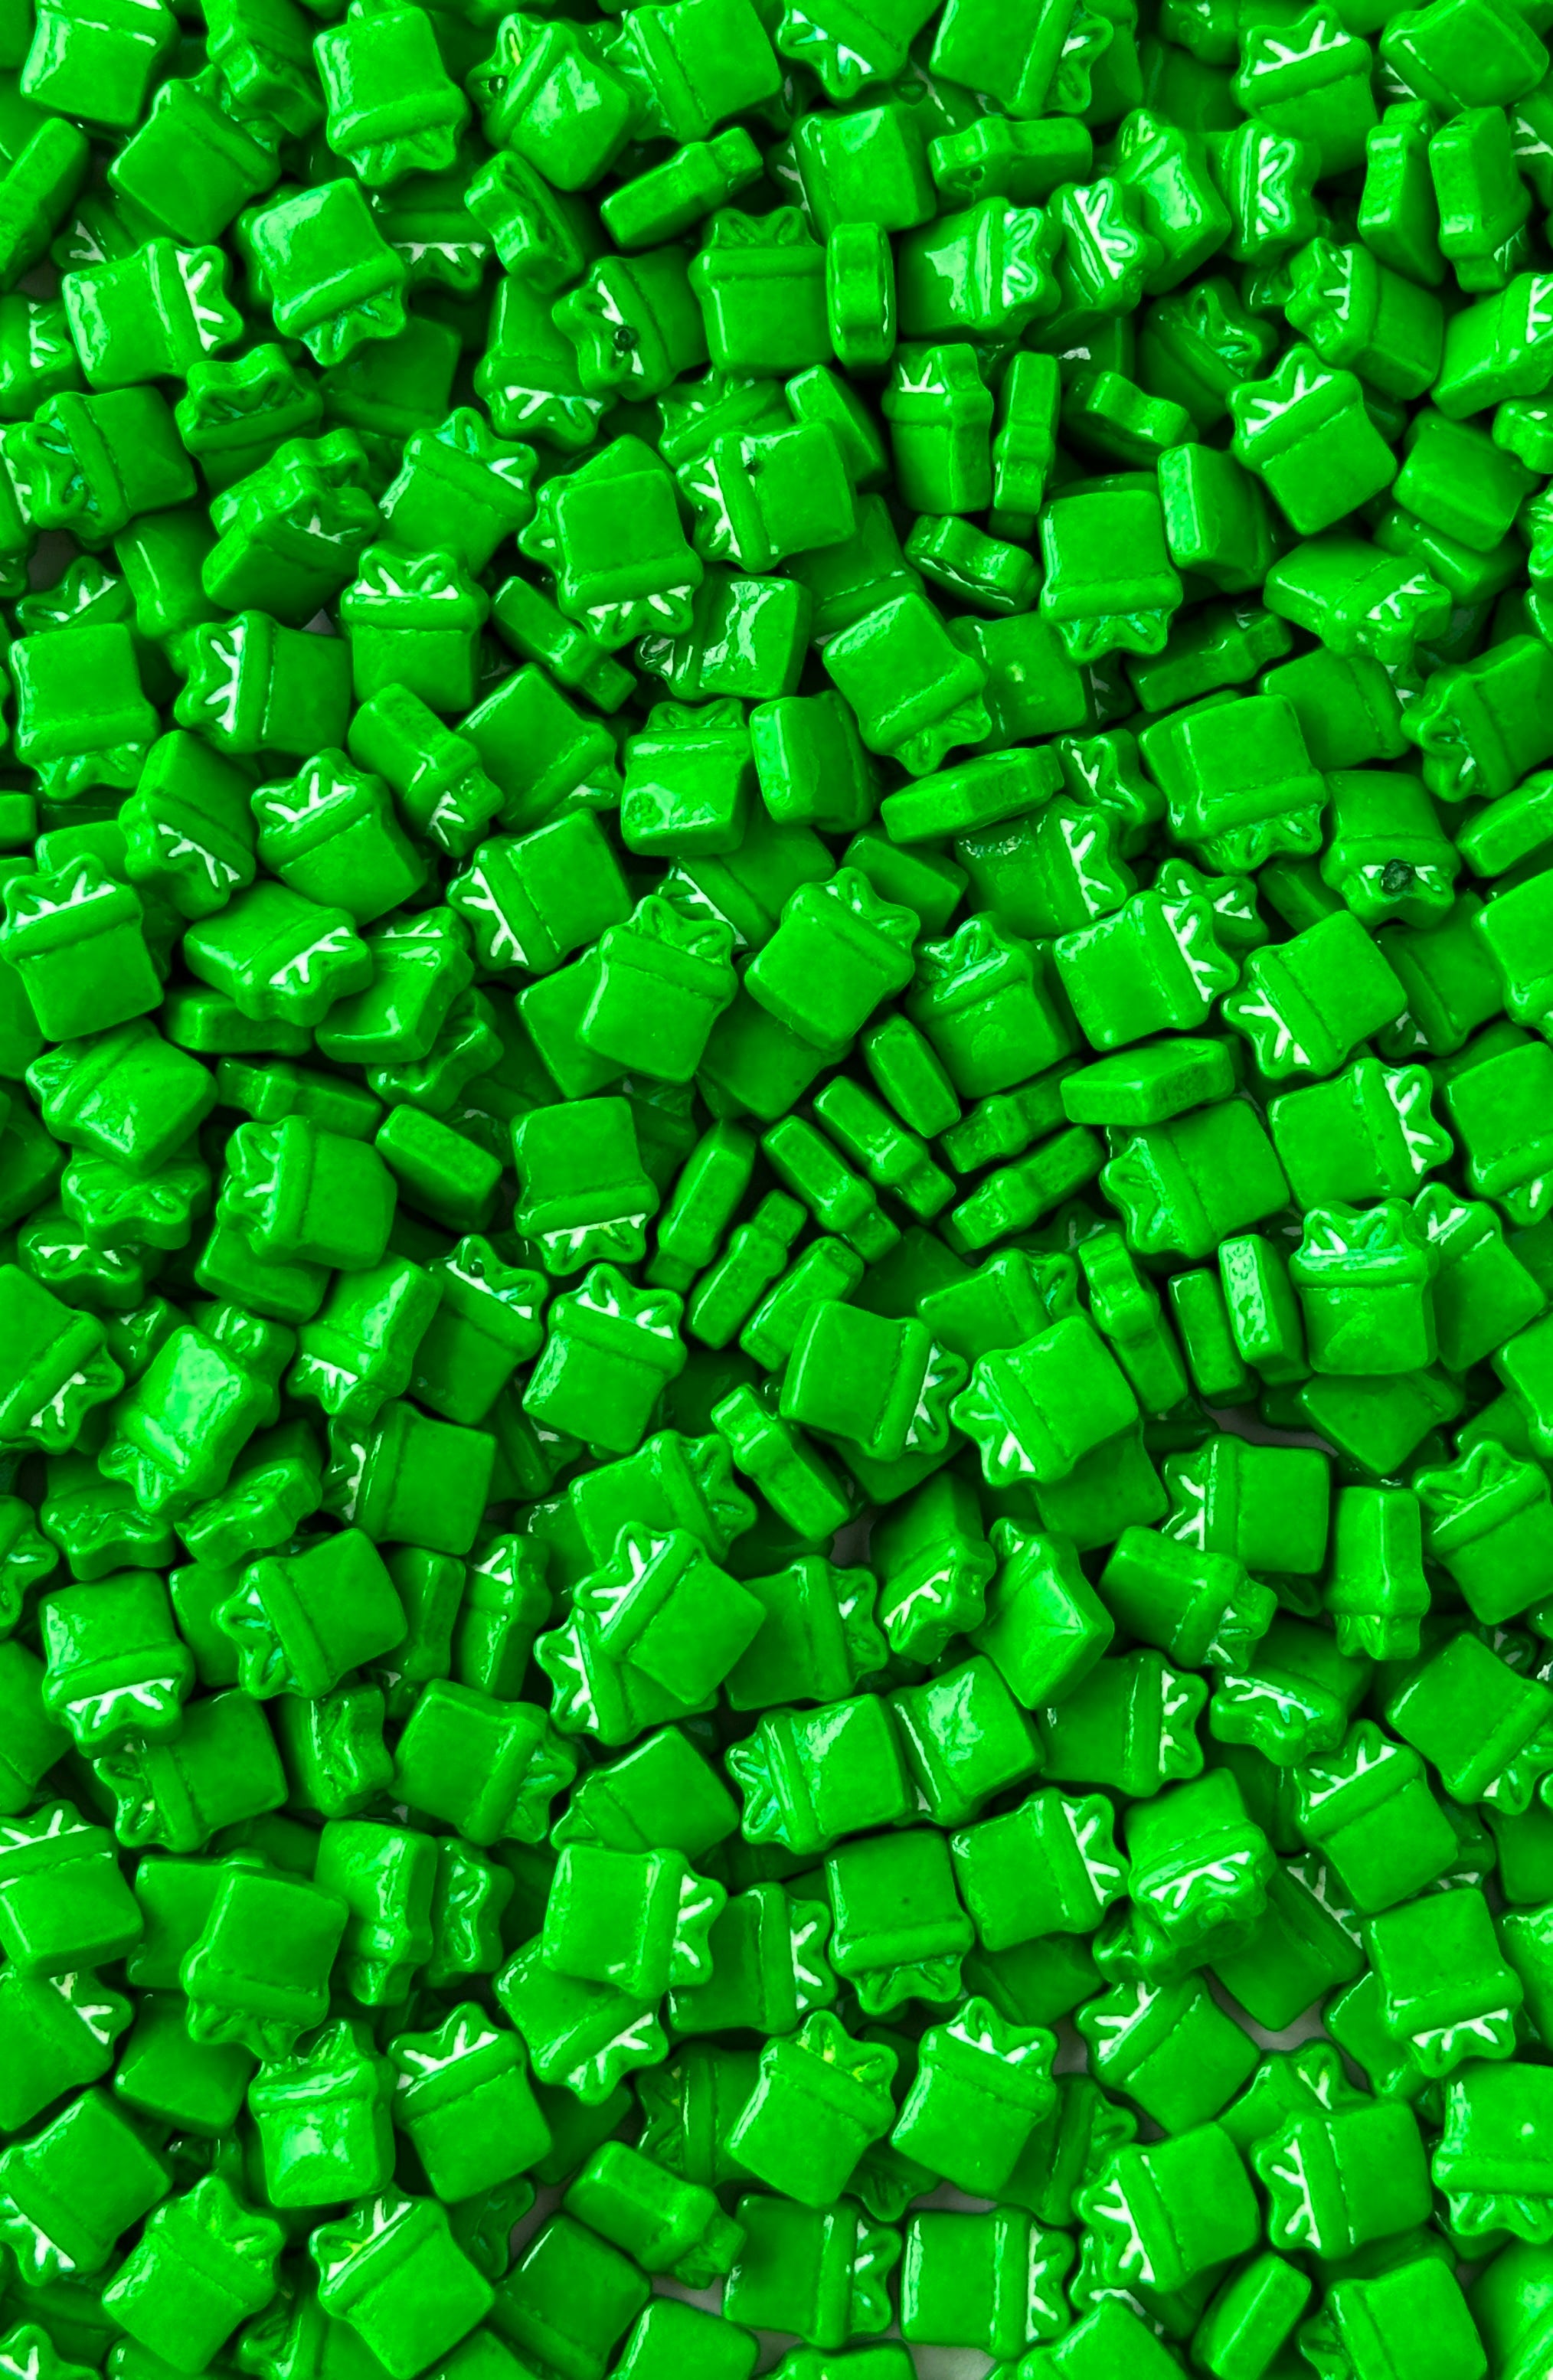 Green Present Candy - US